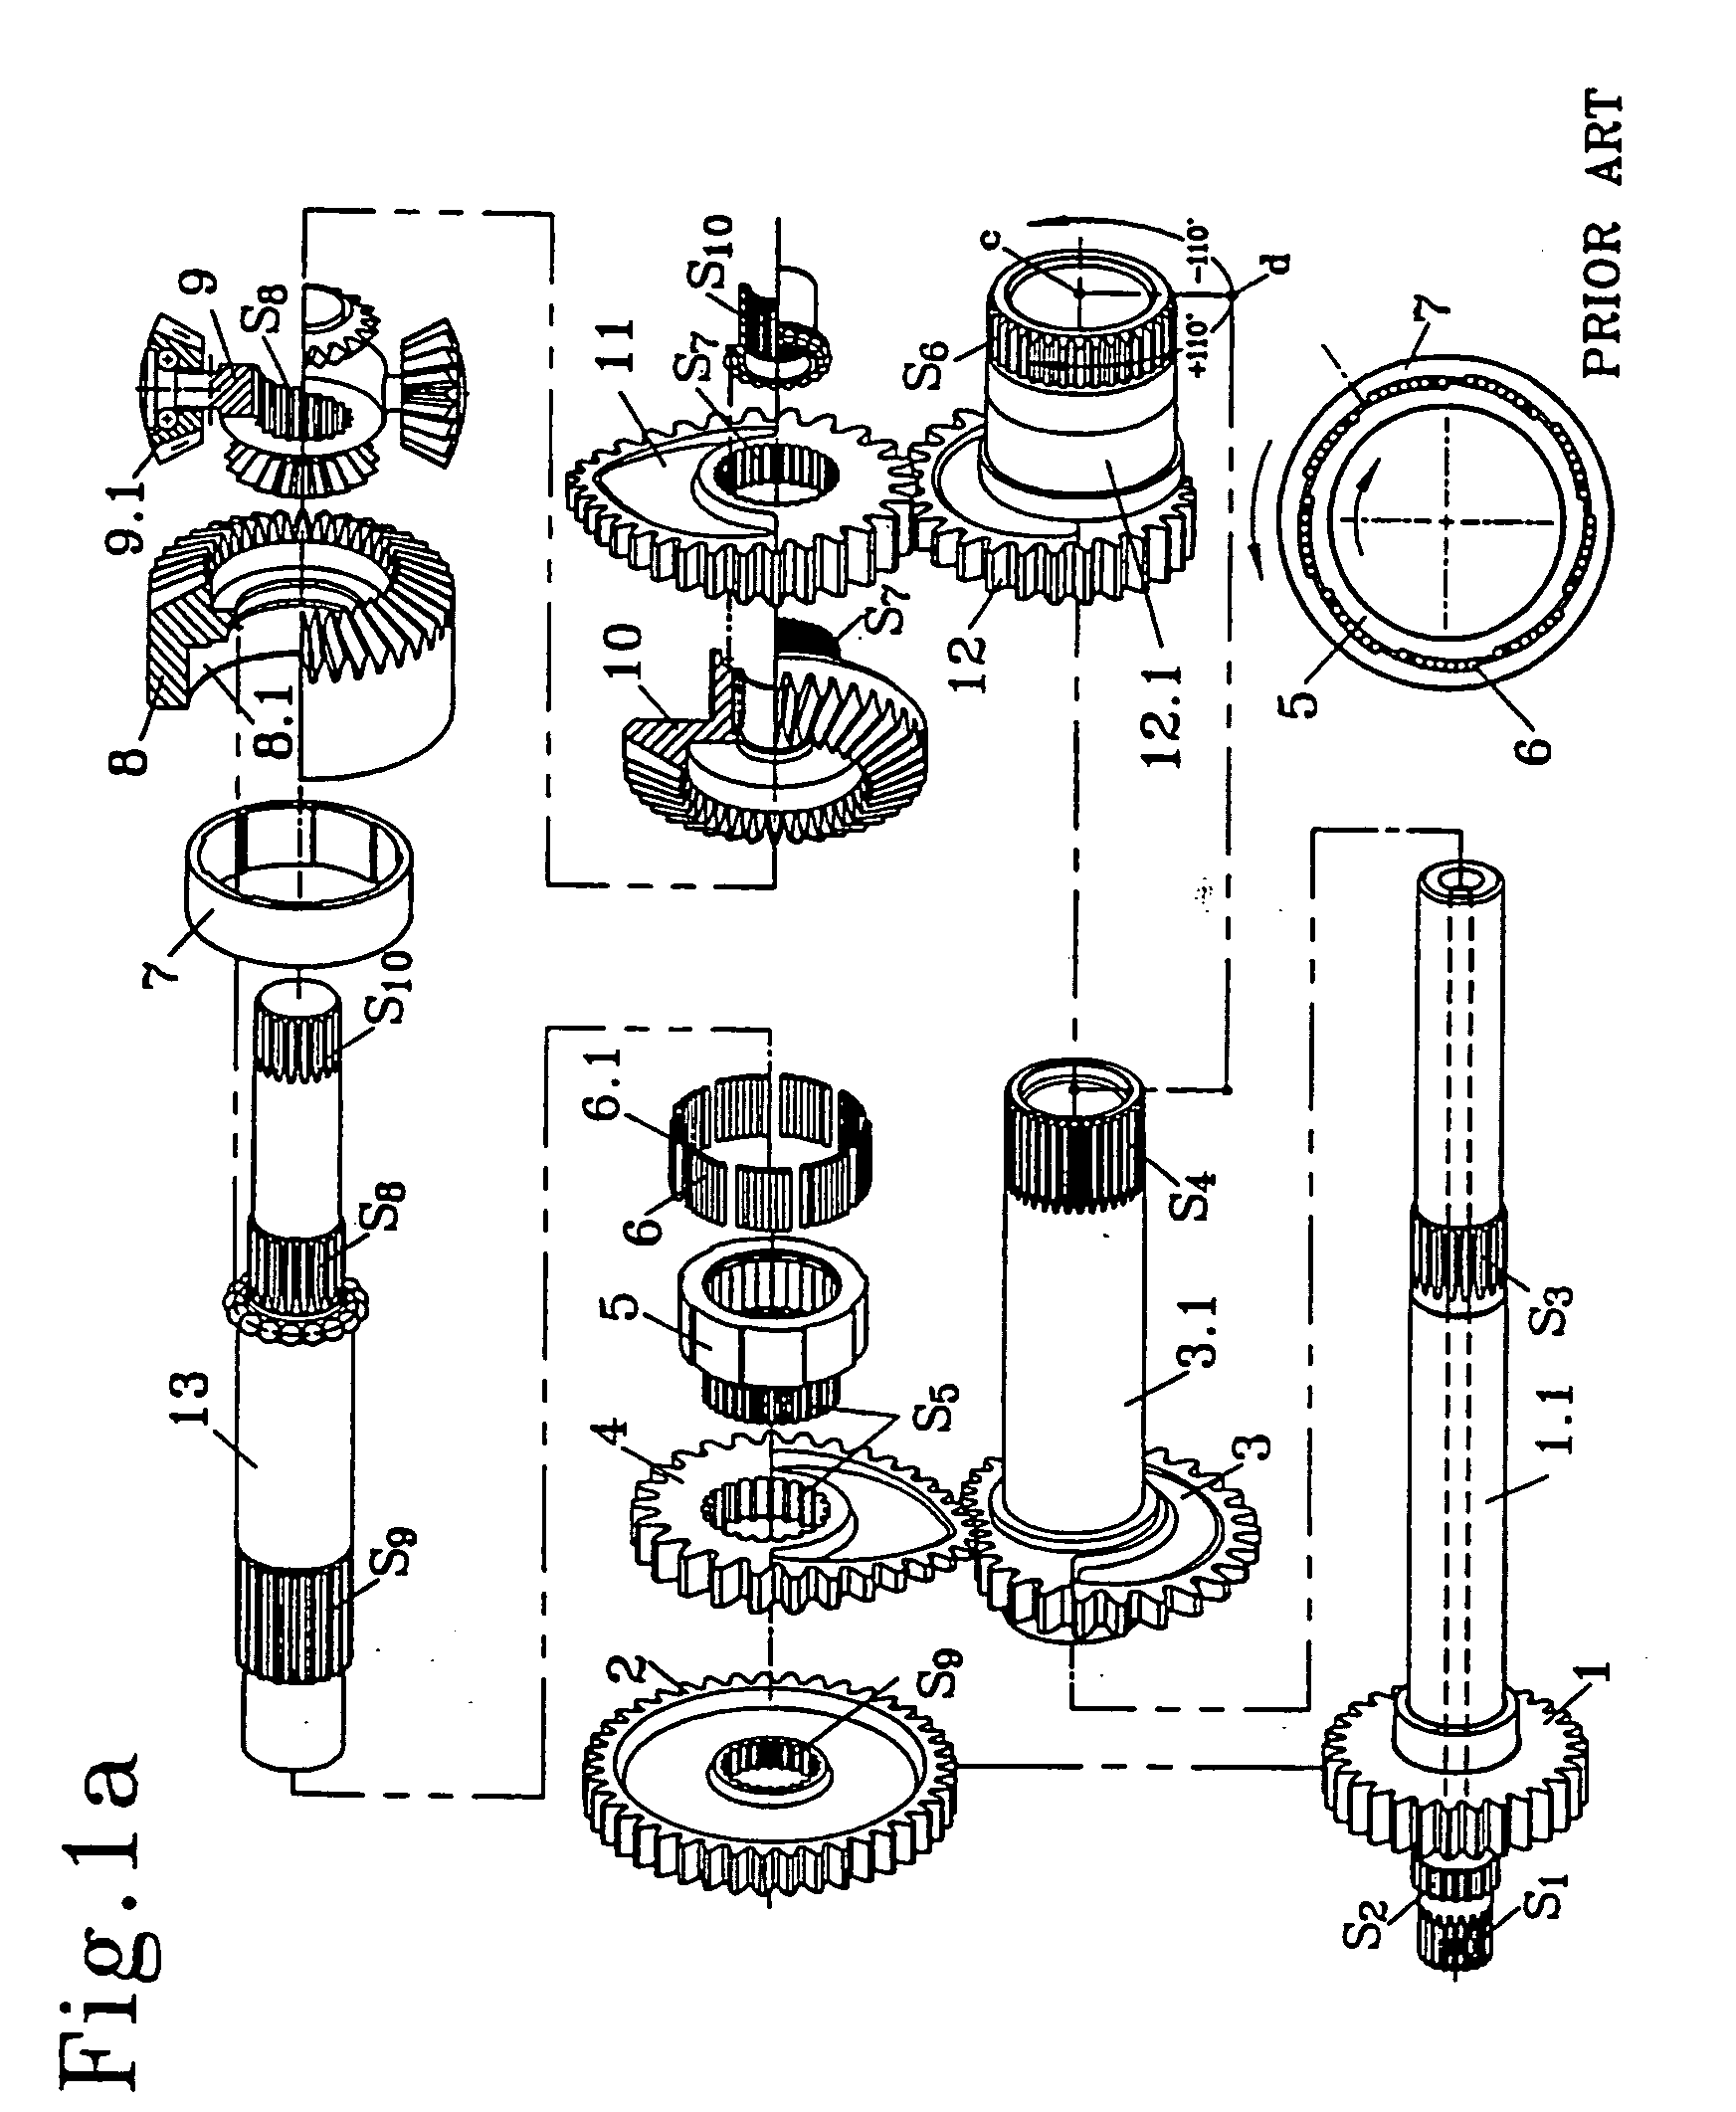 All gear infinitely variable transmission